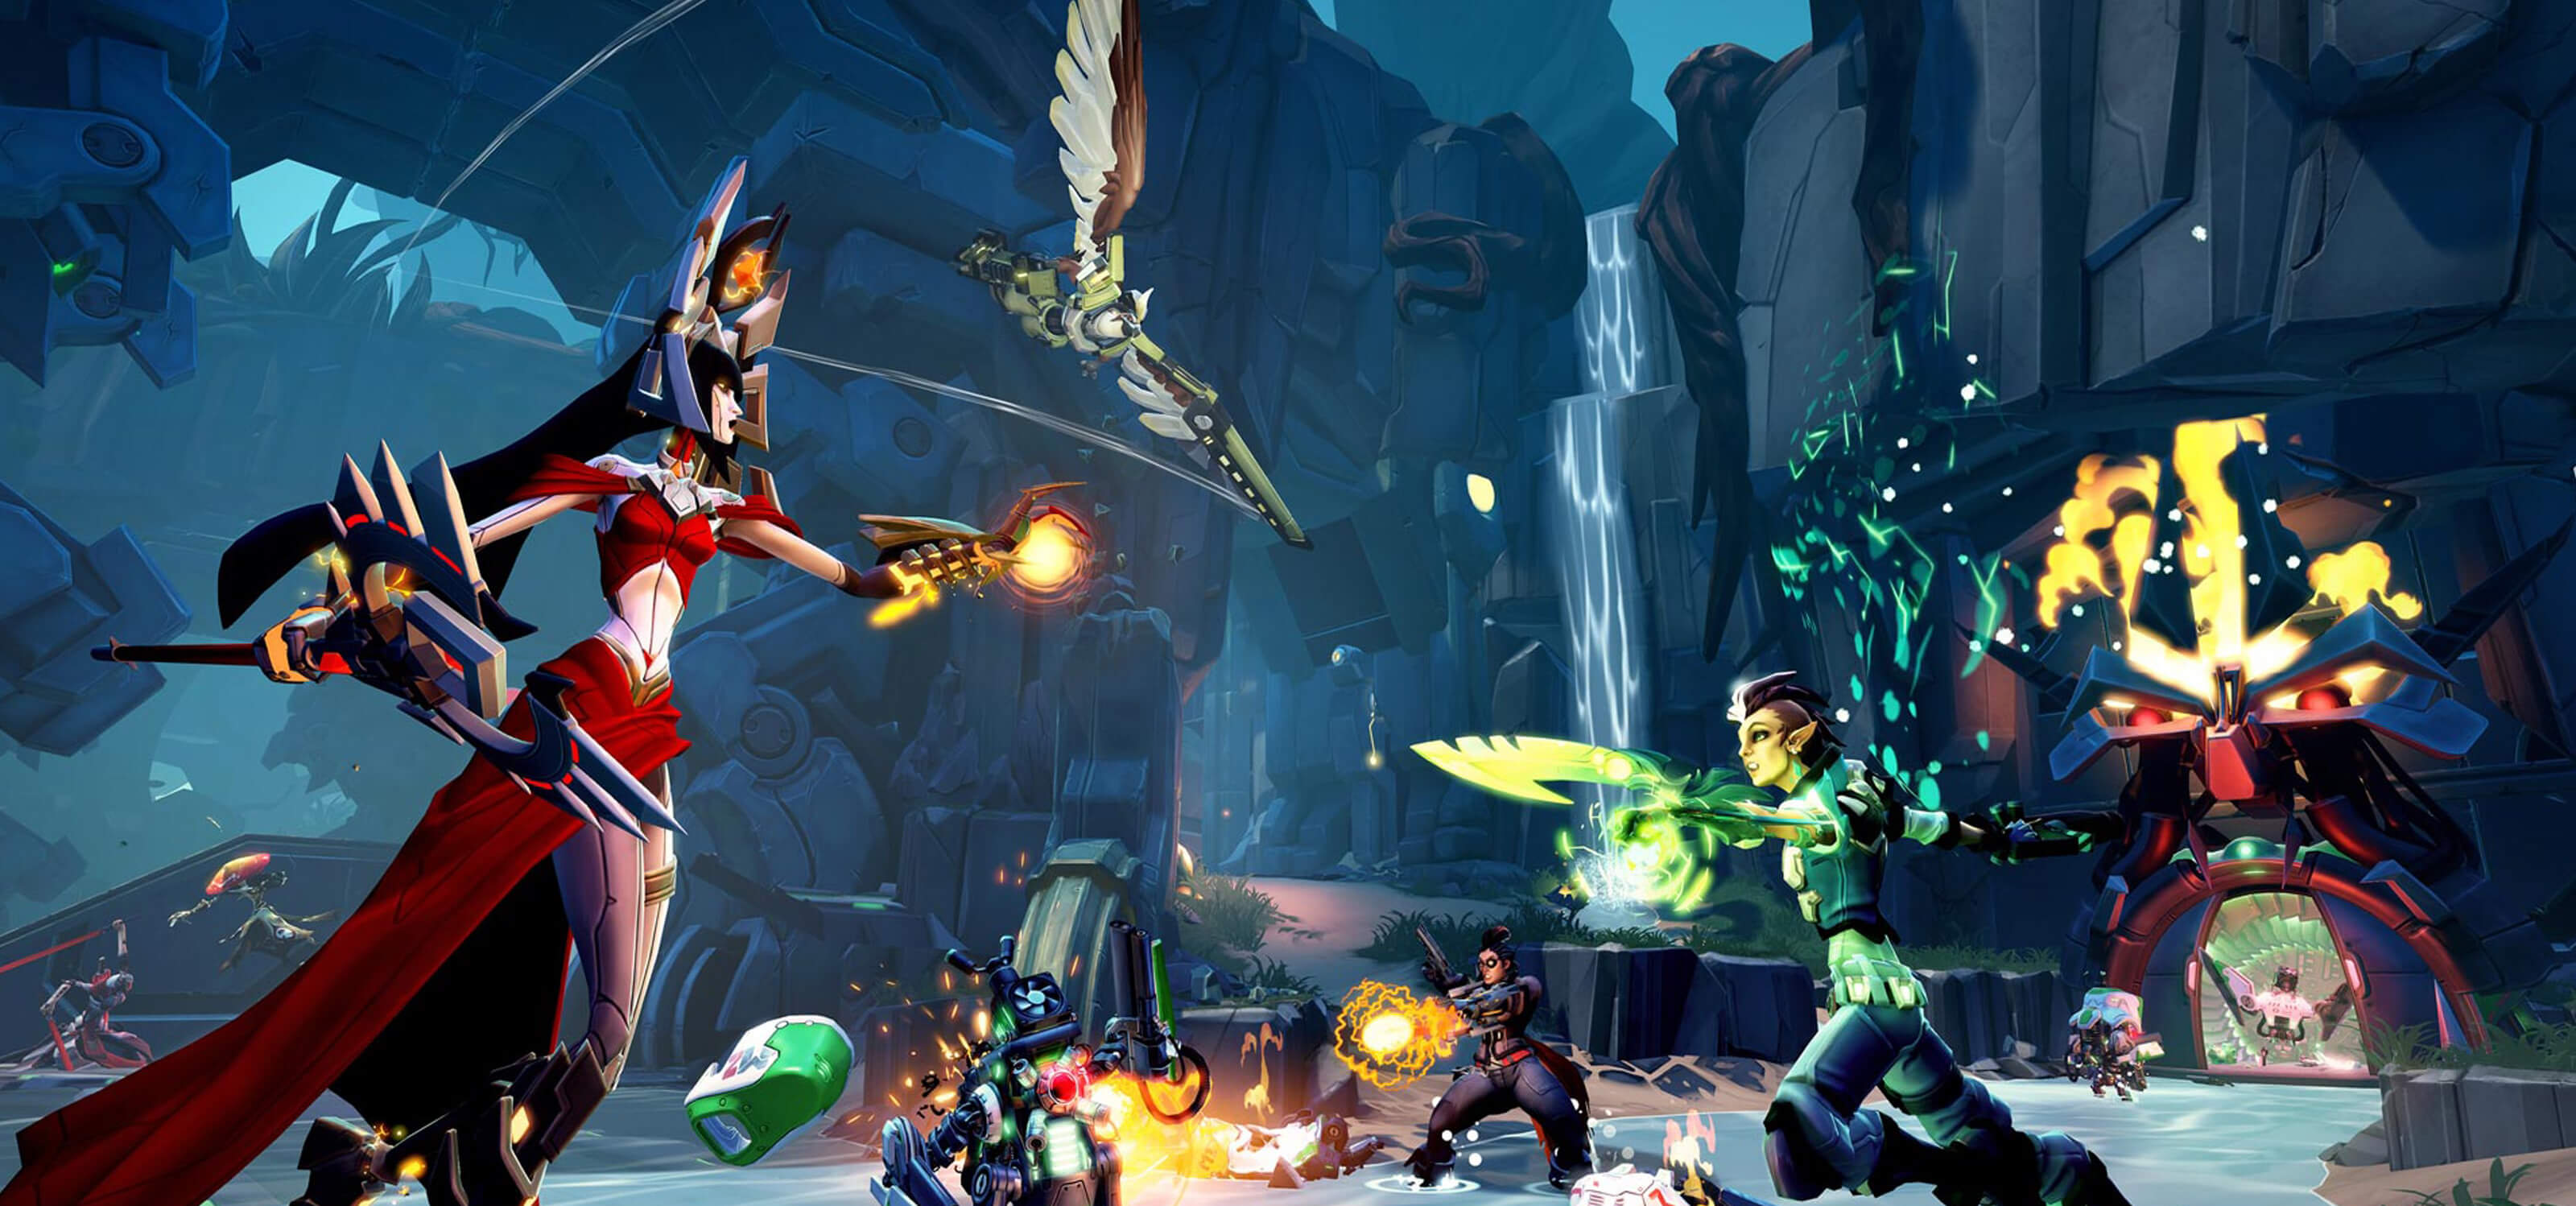 Screenshot of various colorful Battleborn characters competing in a cavern in meltdown mode